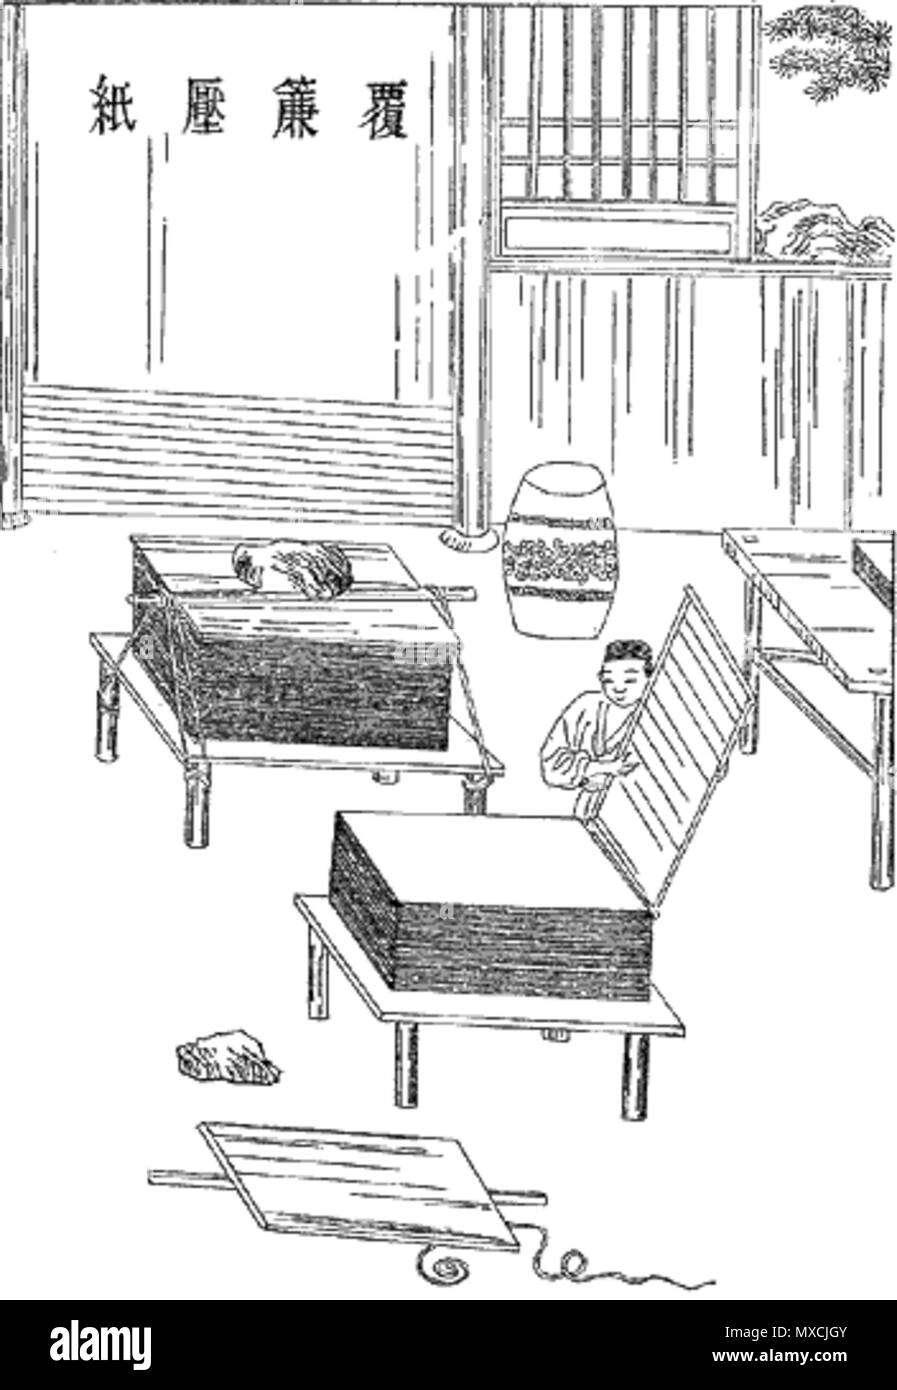 . An image of a Ming dynasty woodcut describing five major steps in ancient Chinese papermaking process as outlined by Cai Lun in 105 AD . This file is lacking author information. 389 Making Paper 4 Stock Photo